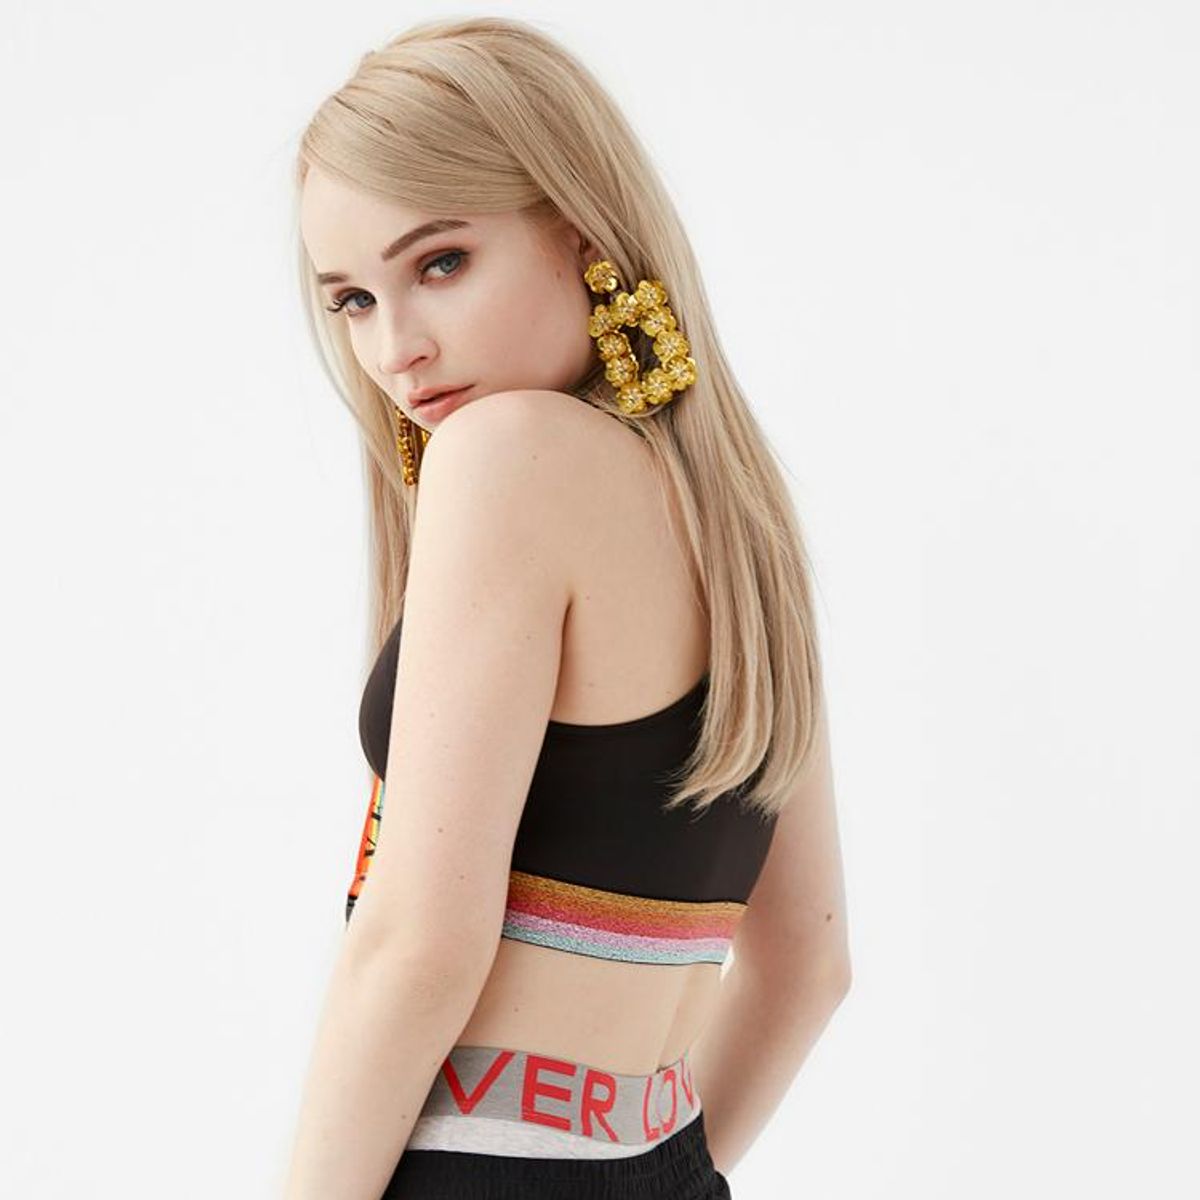 KIM PETRAS WHAT PRIDE MEANS TO ME H&M PRIDE OUT LOUD